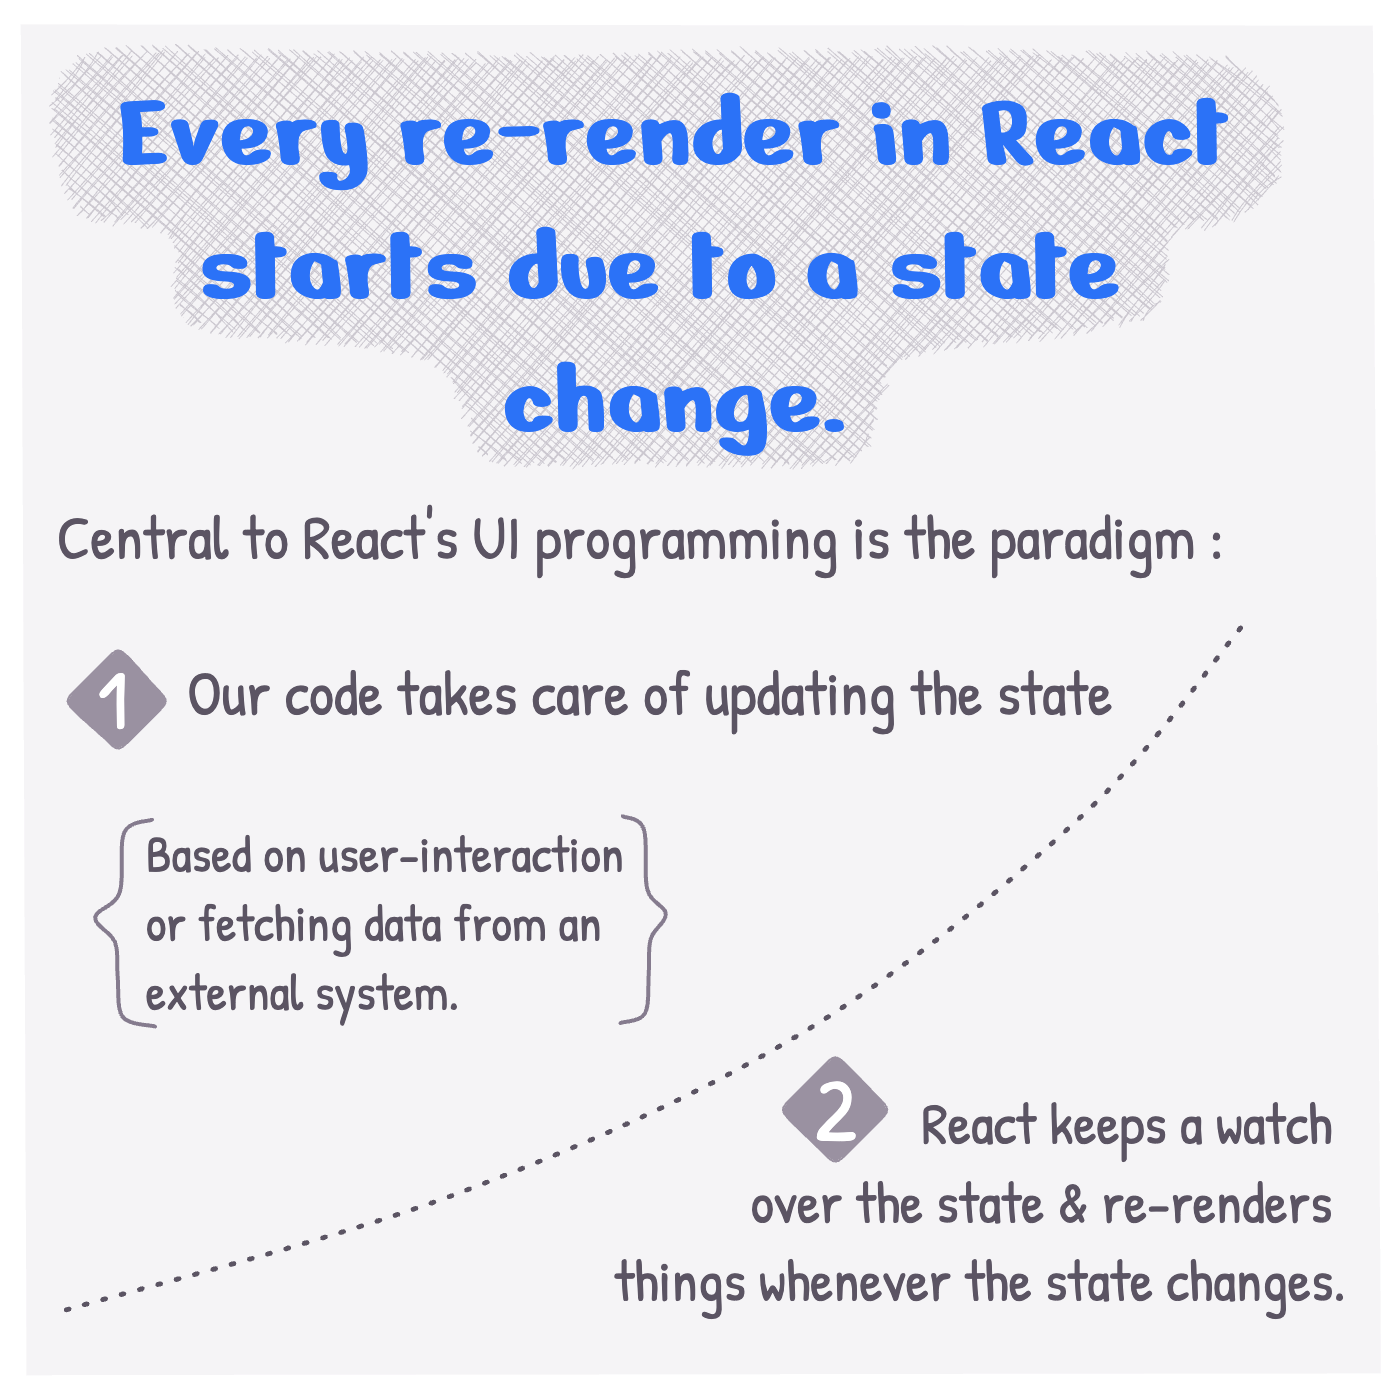 Every re-render in React starts due to a change change. Central to React's UI programming paradigm is [a] Our code takes care of updating the state and [b] React keeps a watch over the state & re-renders things whenever the state changes.